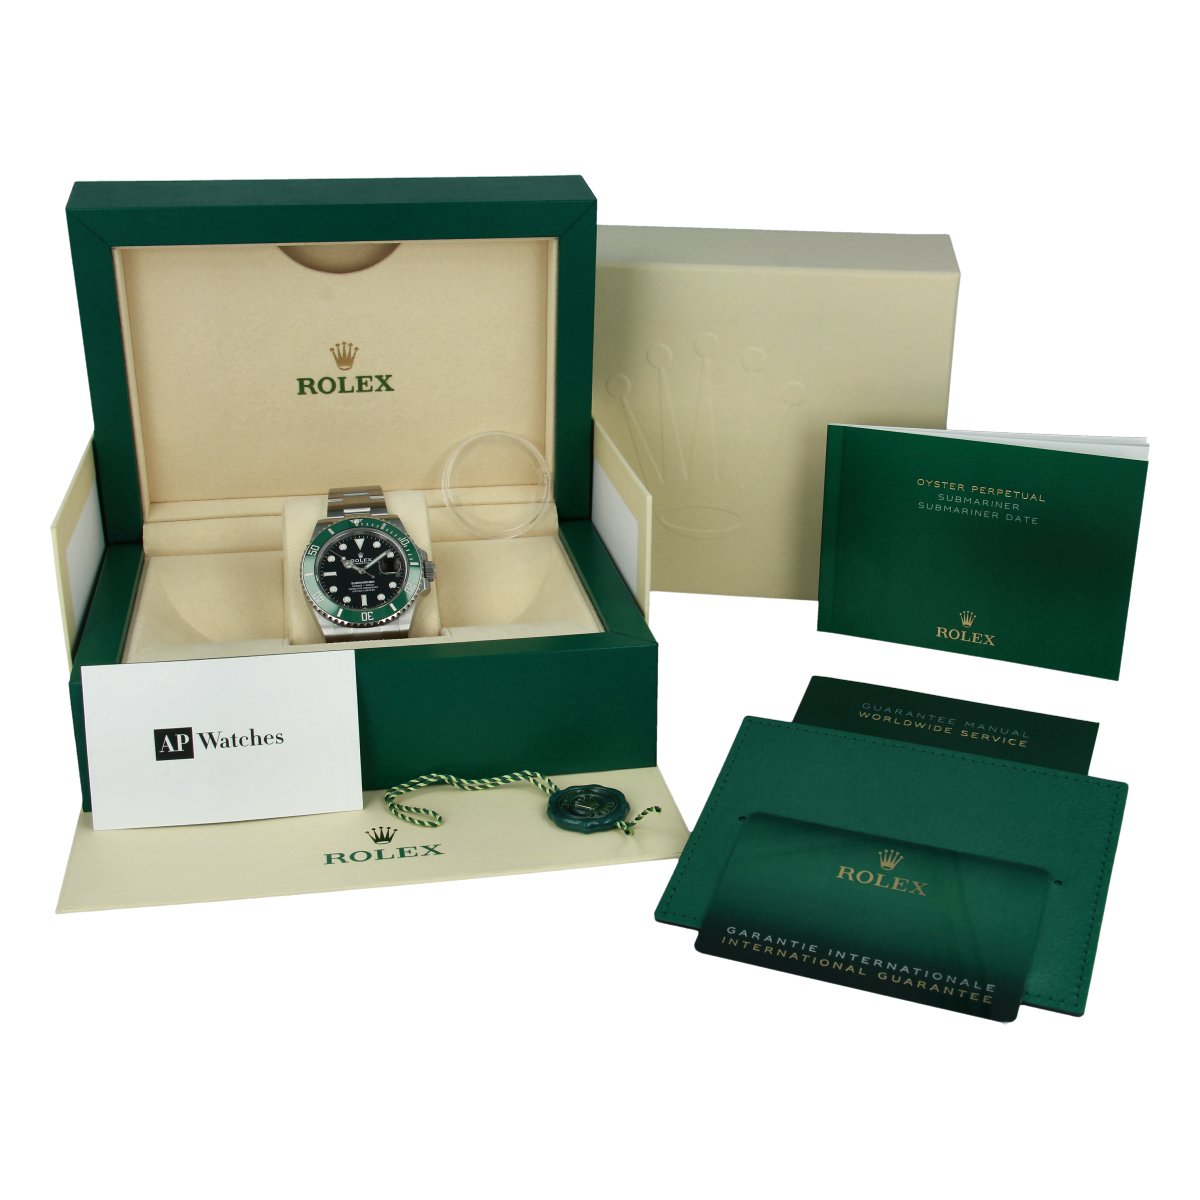 Rolex Submariner Date 126610lv Starbucks (Collection, Unboxing, Review &  Close-up Shots) 